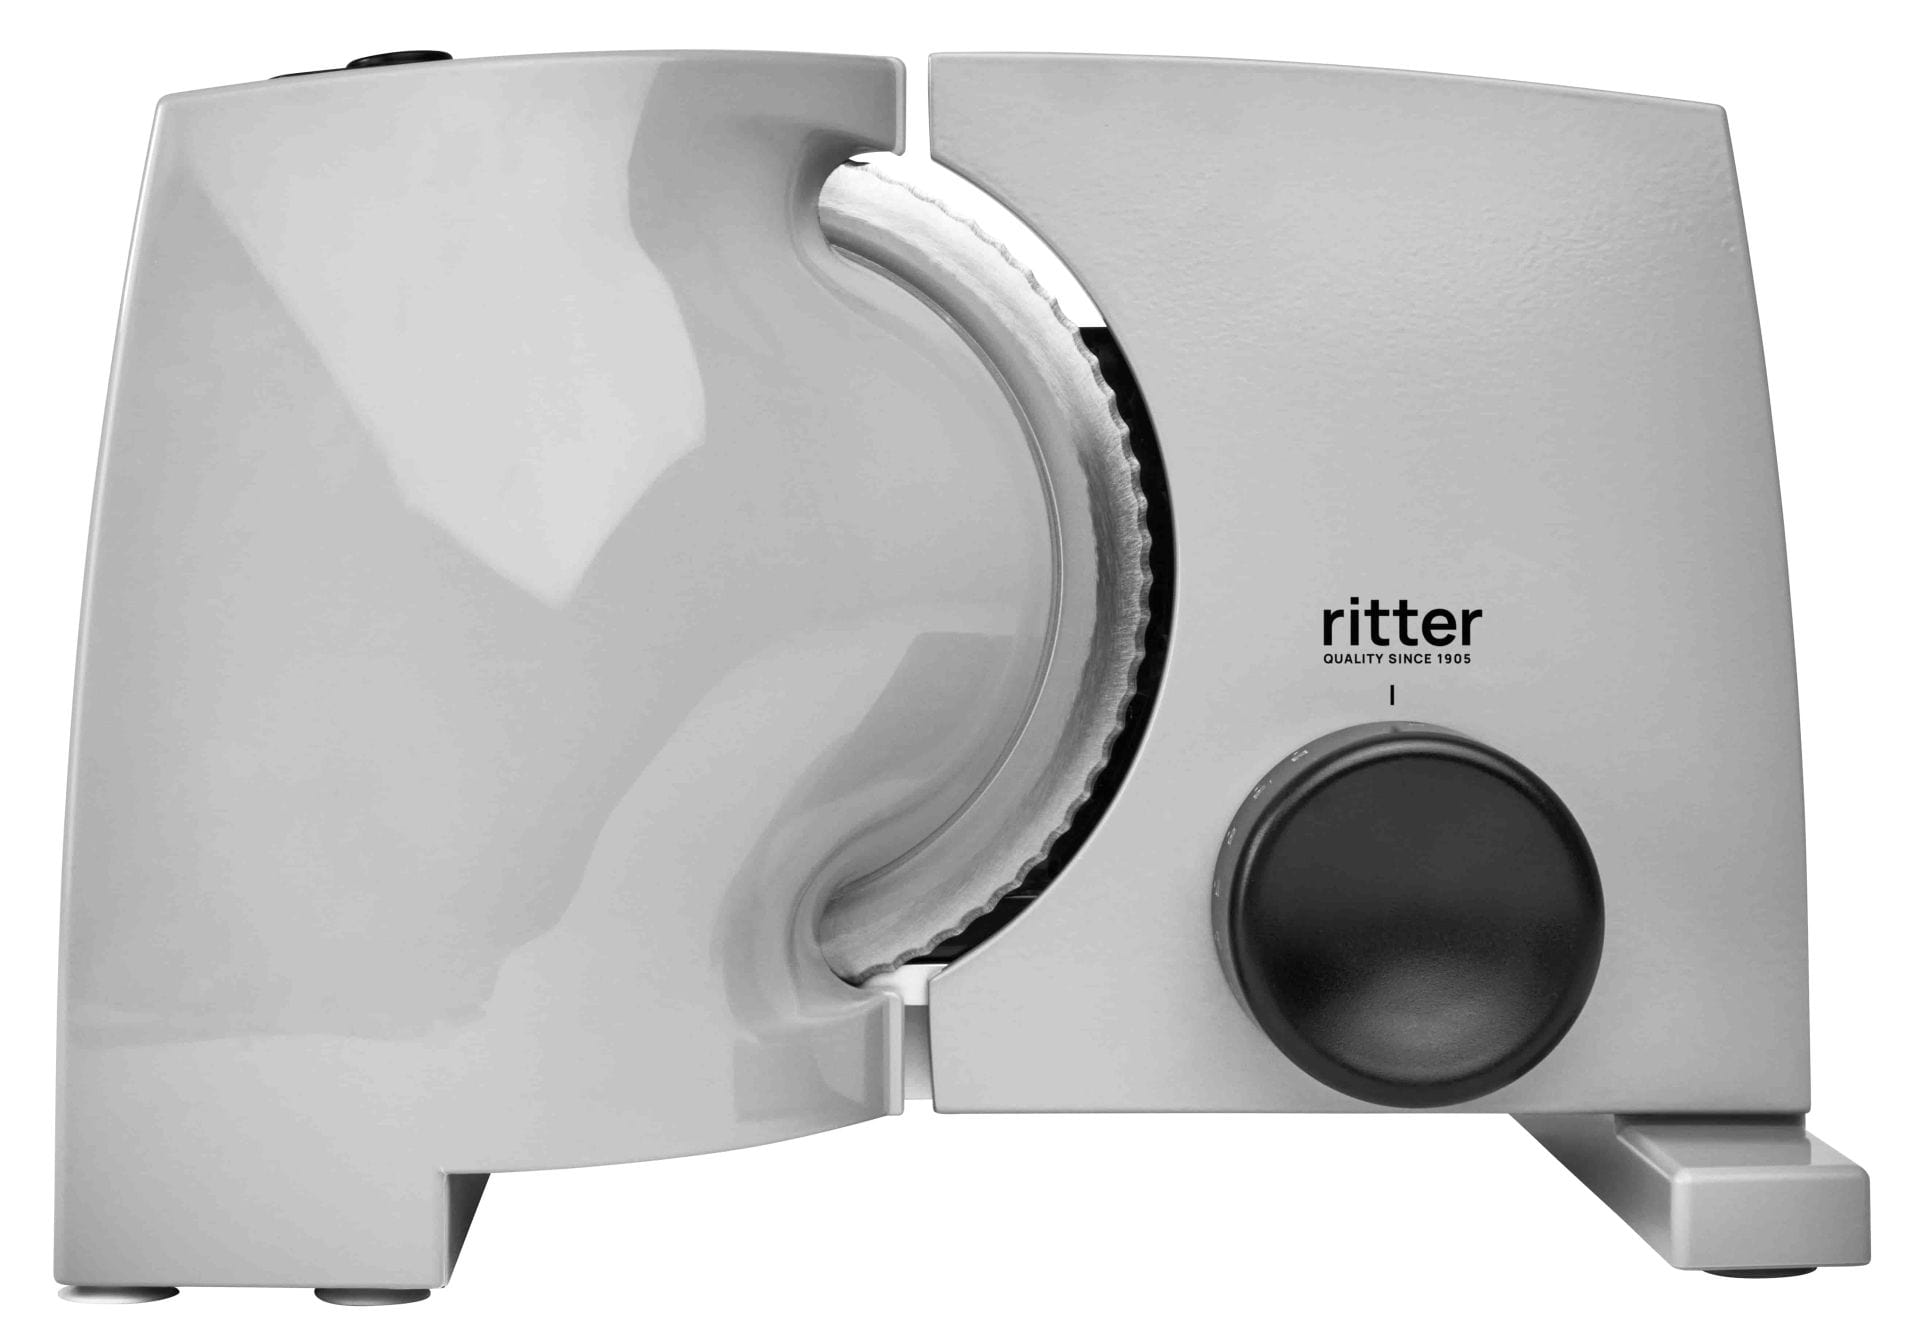 107020 Ritter Manual Food or Bread Slicer Ritter Podio 3 Brotmaschine –  German Specialty Imports llc